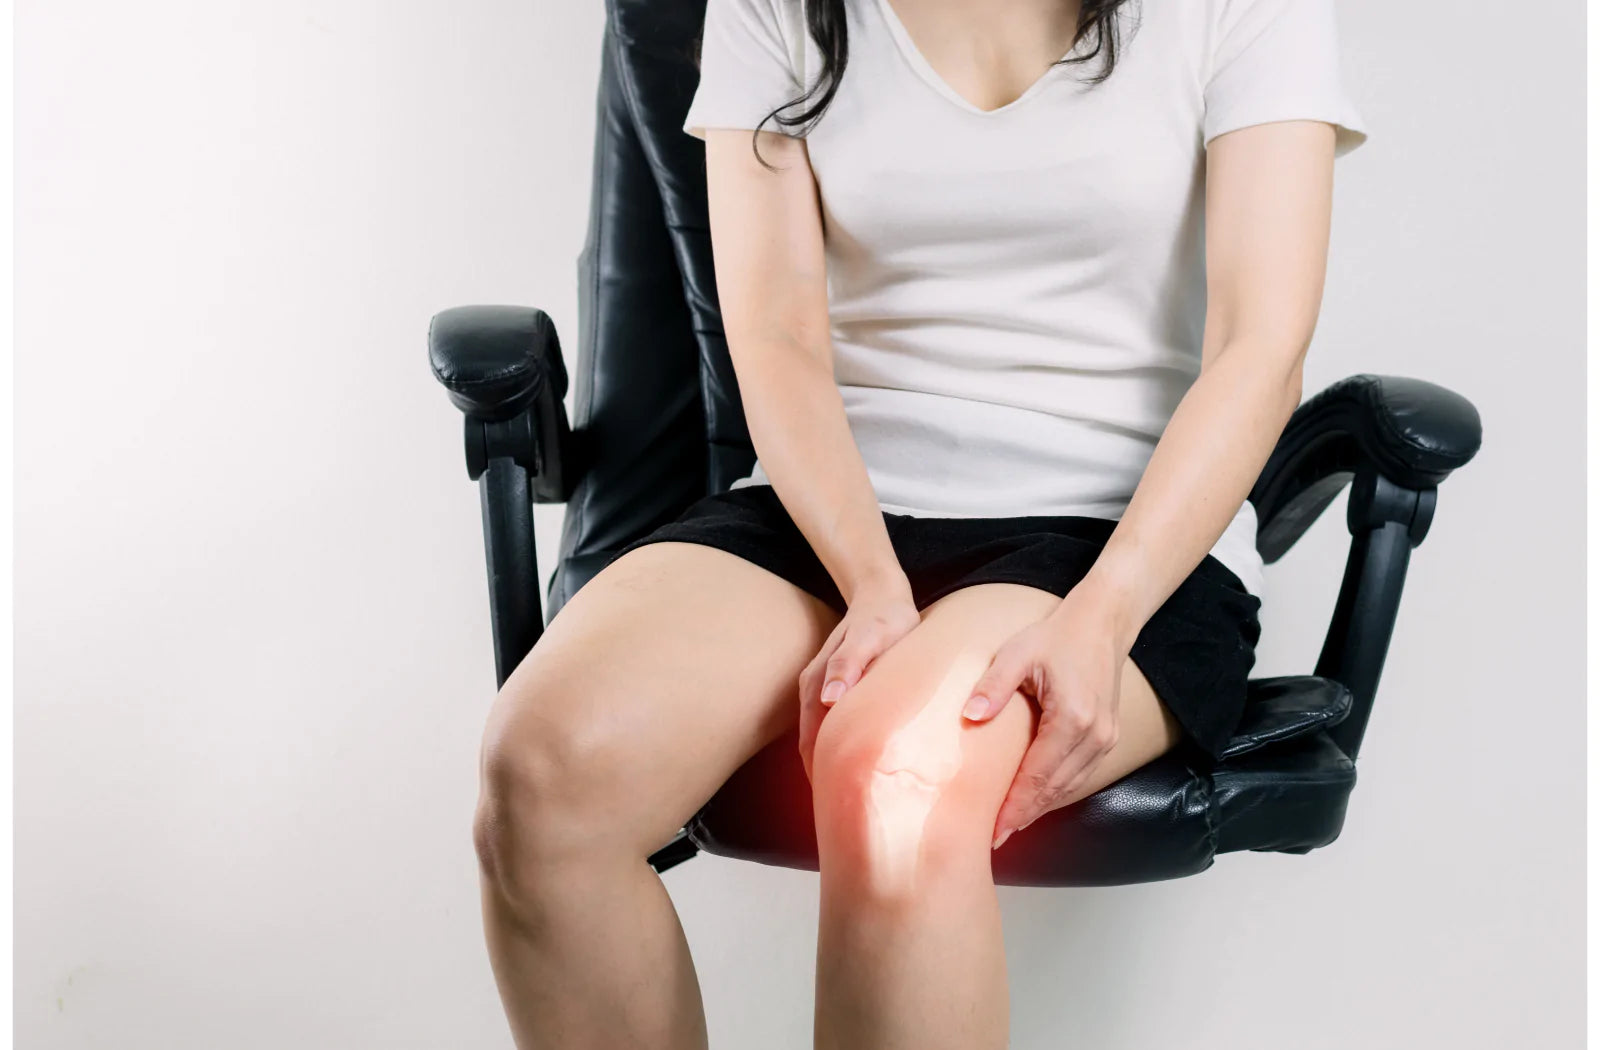 The Best Osteoarthritis Treatment Options: How to Reduce Joint Pain?